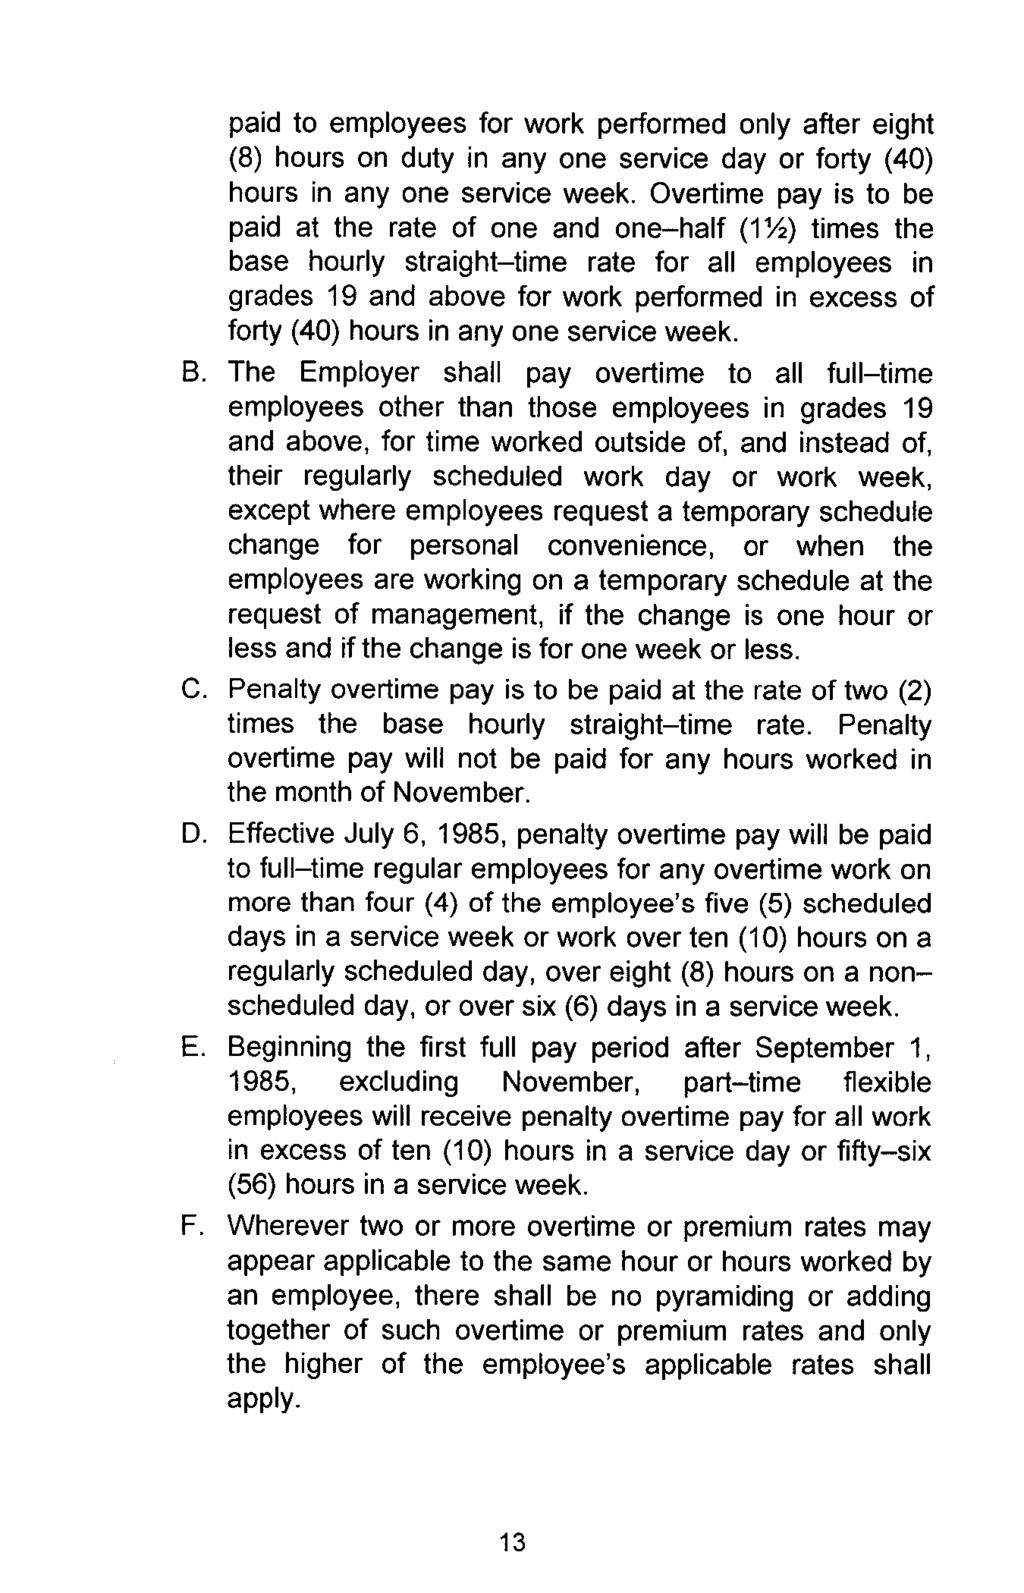 paid to employees for work performed only after eight (8) hours on duty in any one service day or forty (40) hours in any one service week.